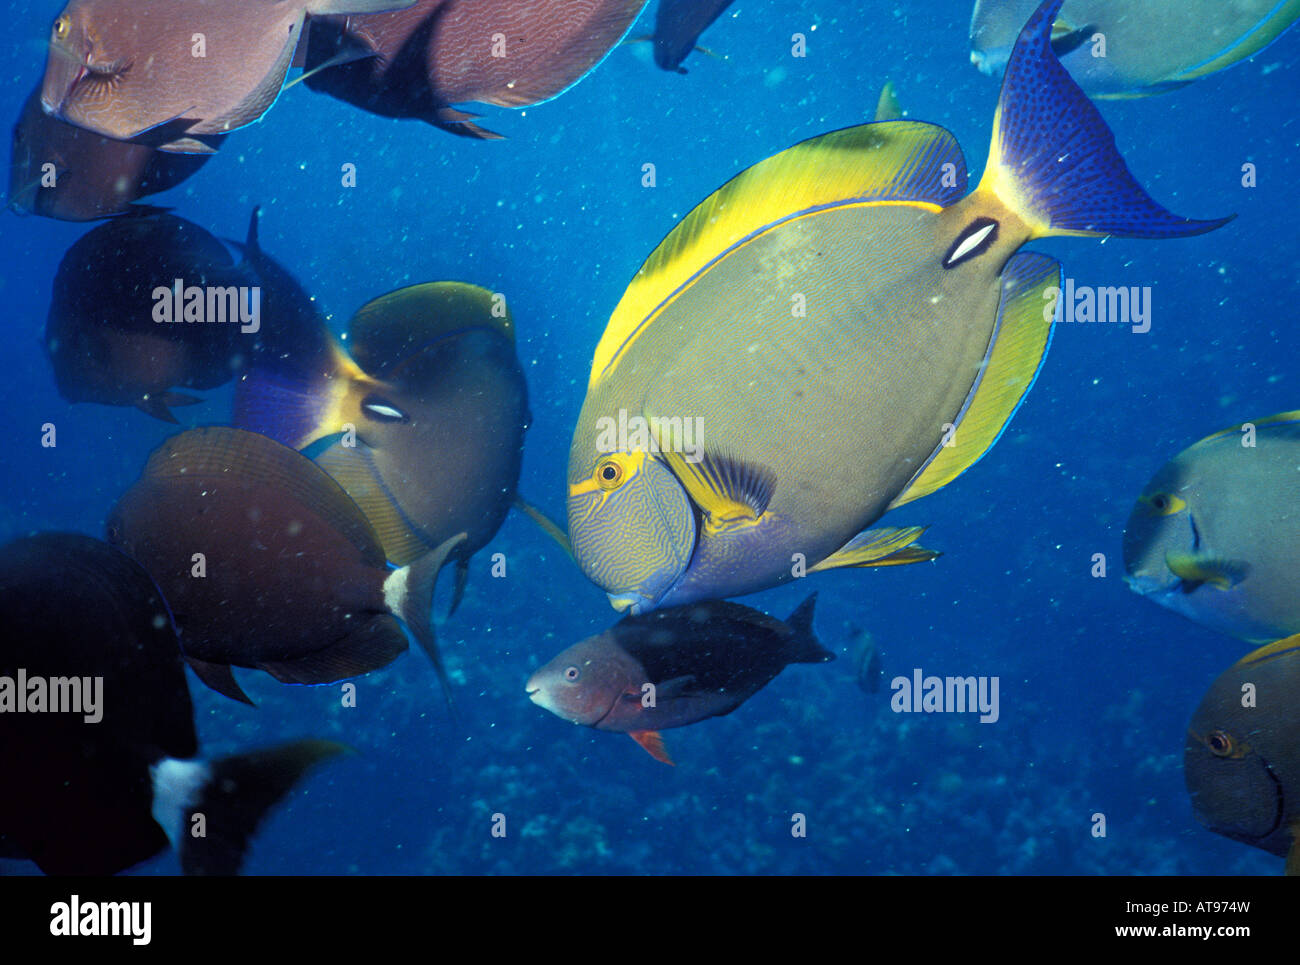 Underwater close-up of Eyestripe Surgeon fish and other reef fish on the Big Island of Hawaii. Stock Photo